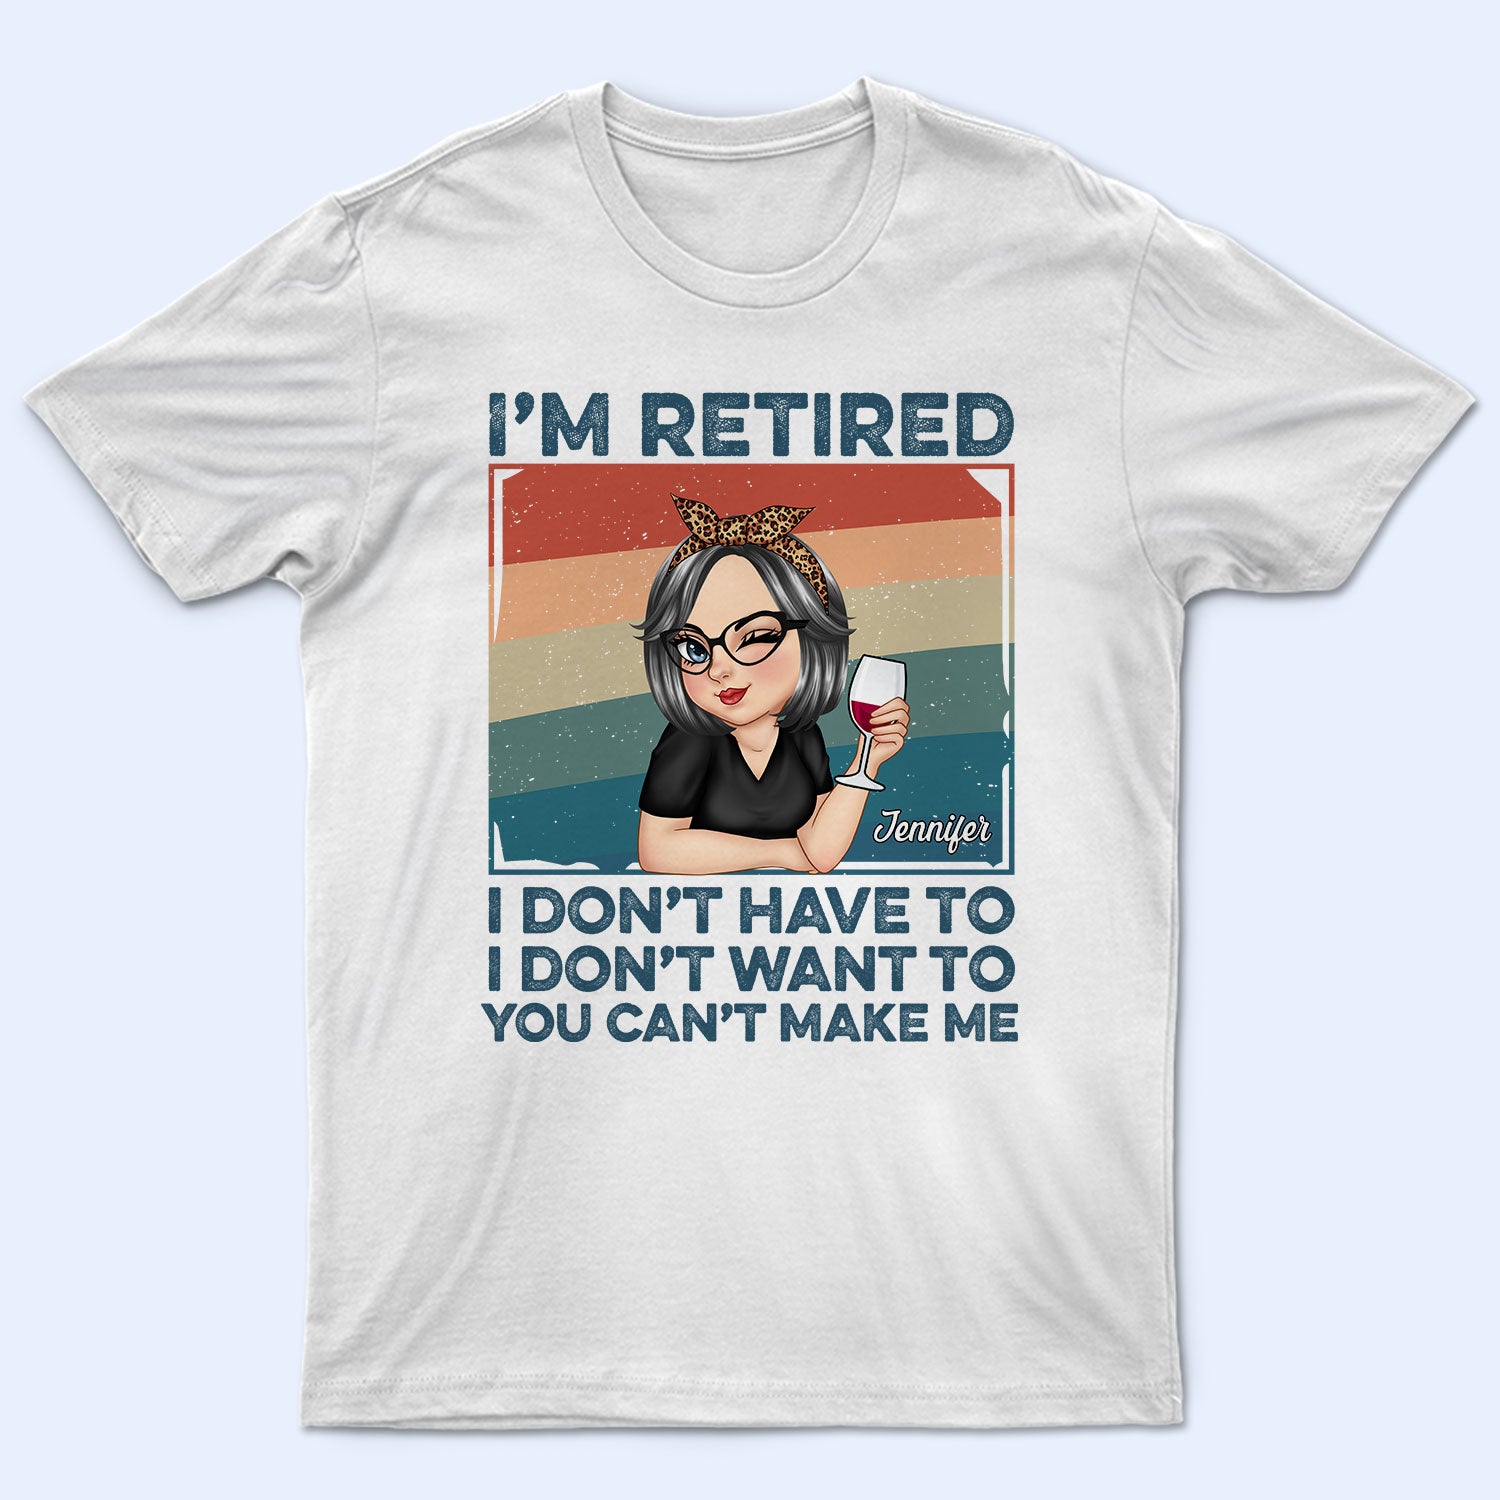 I'm Retired I Don't Want To Light - Retirement Gift For Women, Mom, Grandma - Personalized T Shirt